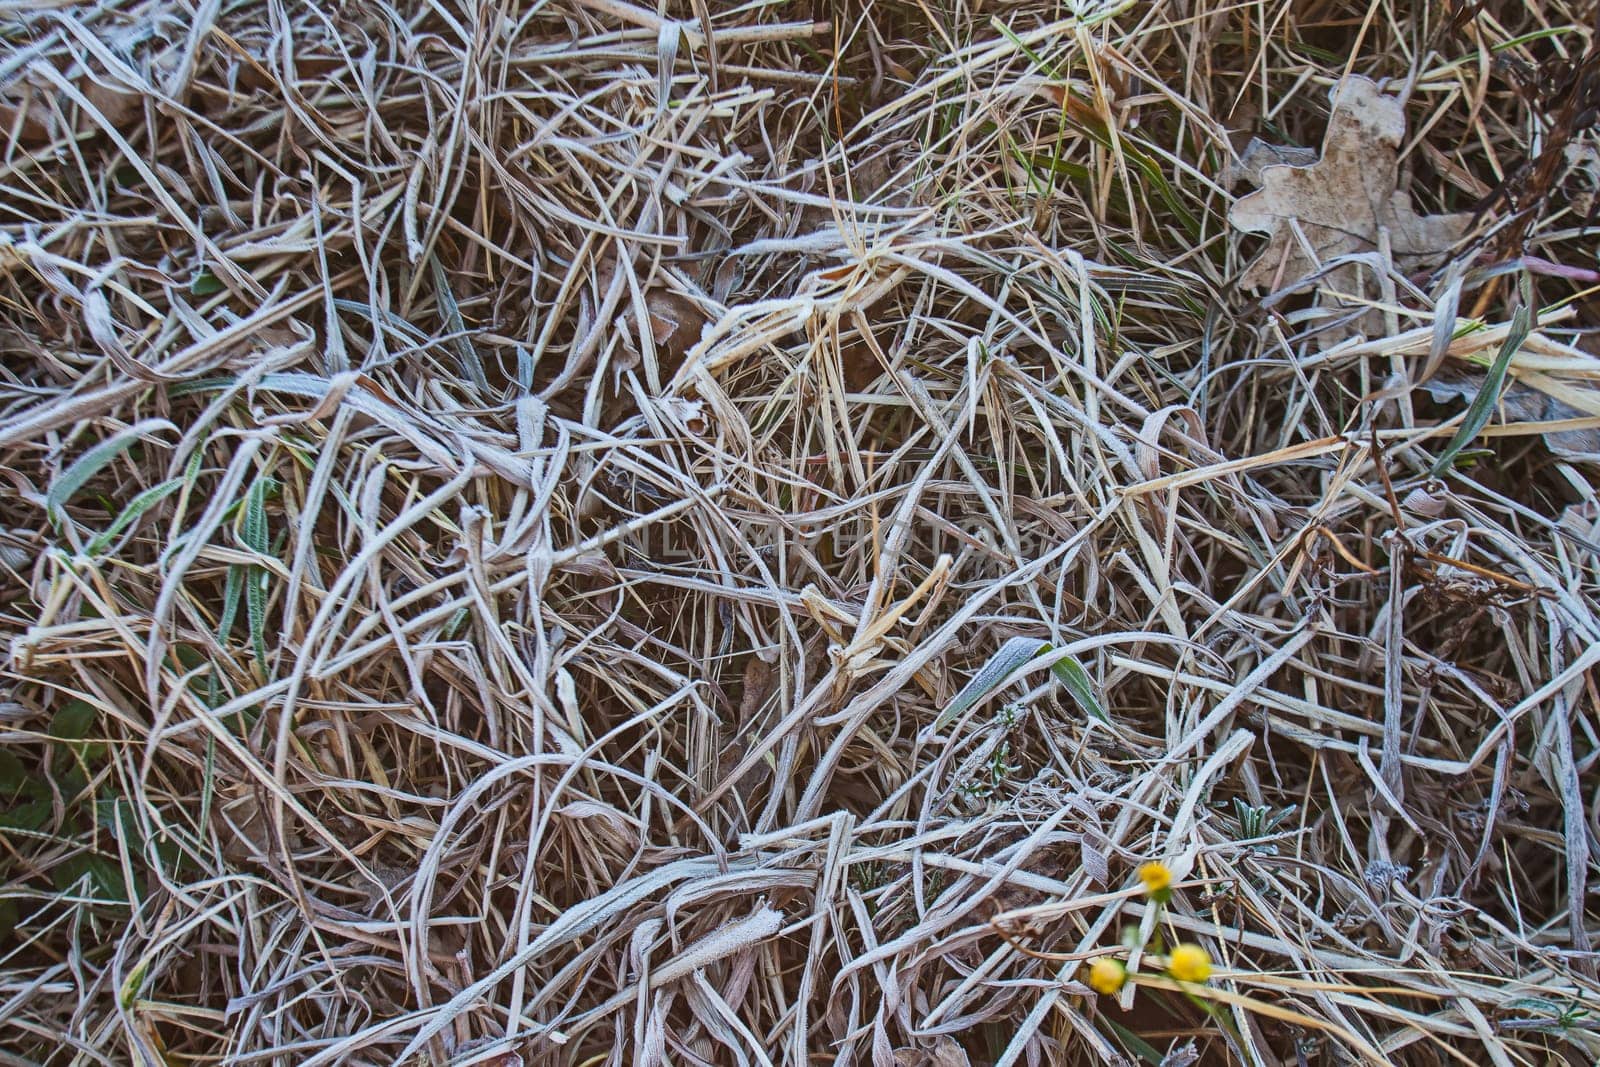 Dried winter grass with a dusting of frost